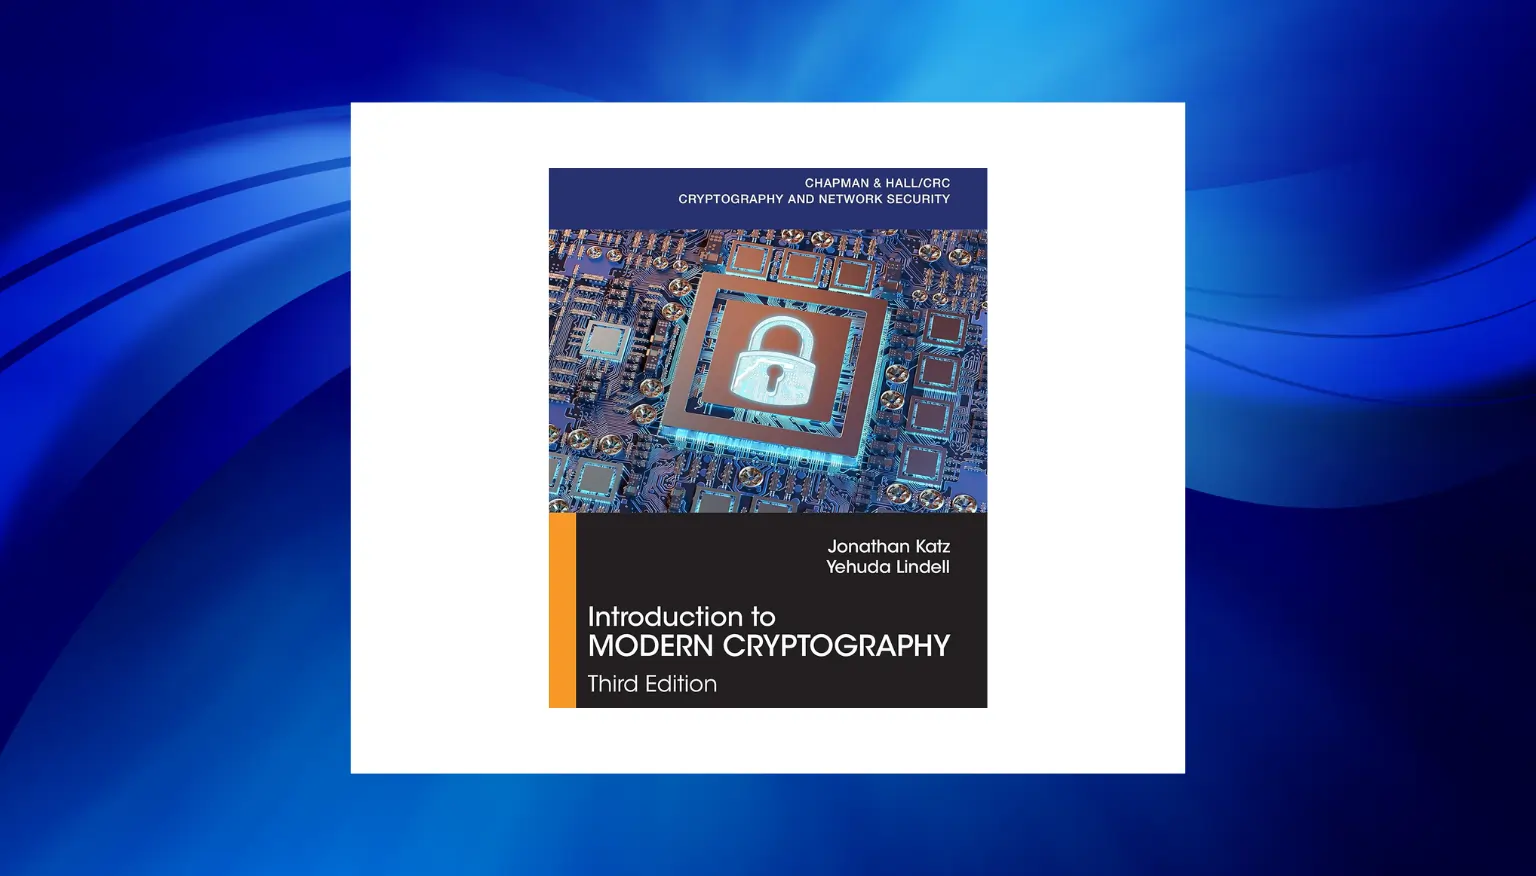 top cryptography books - Introduction to Modern Cryptography by Jonathan Katz and Yehuda Lind